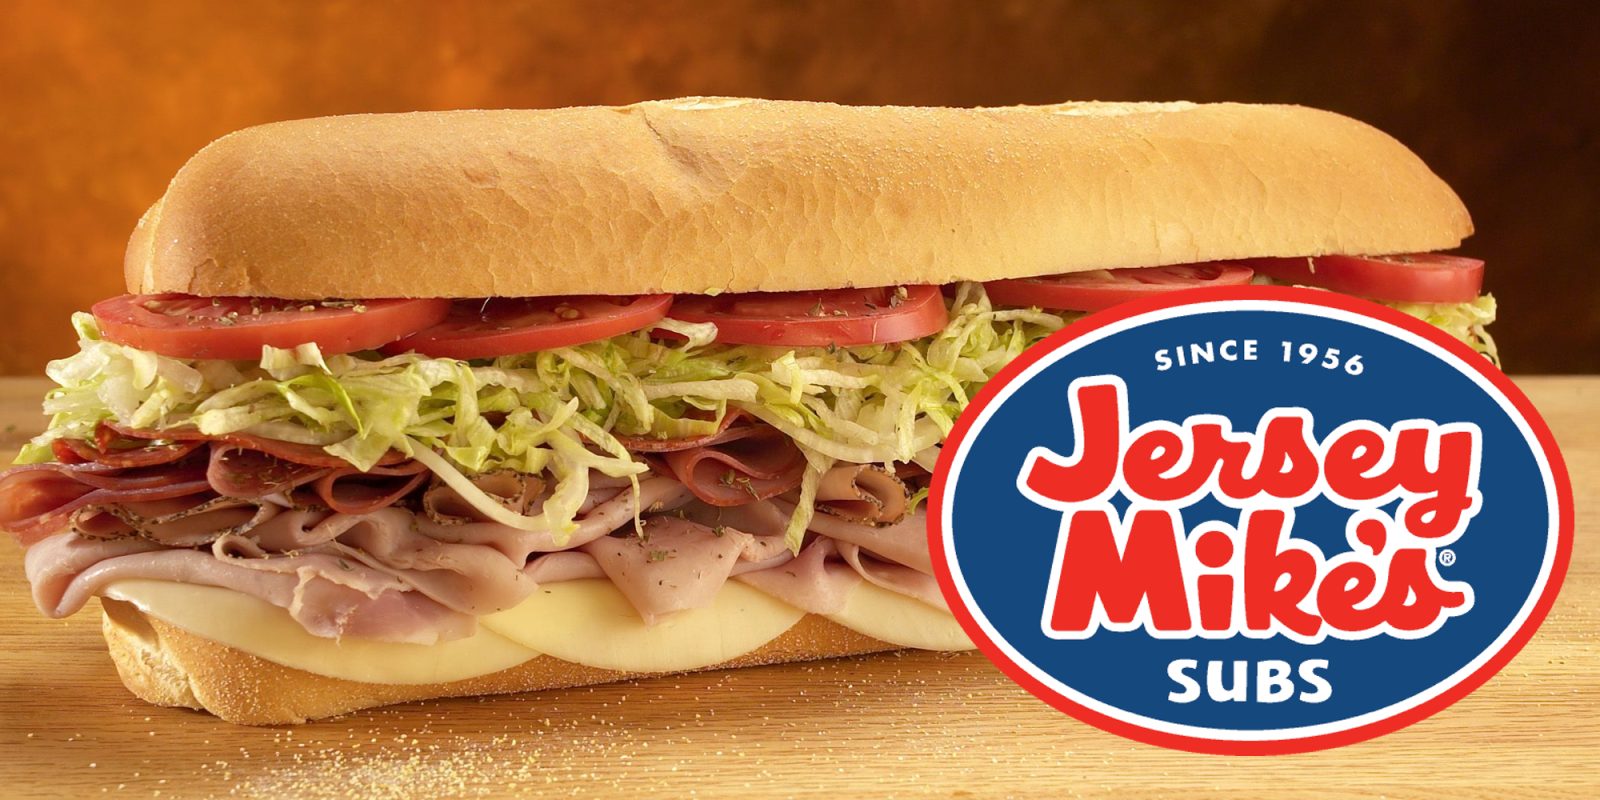 Buy any sub at Jersey Mike's and get one free 9to5Toys